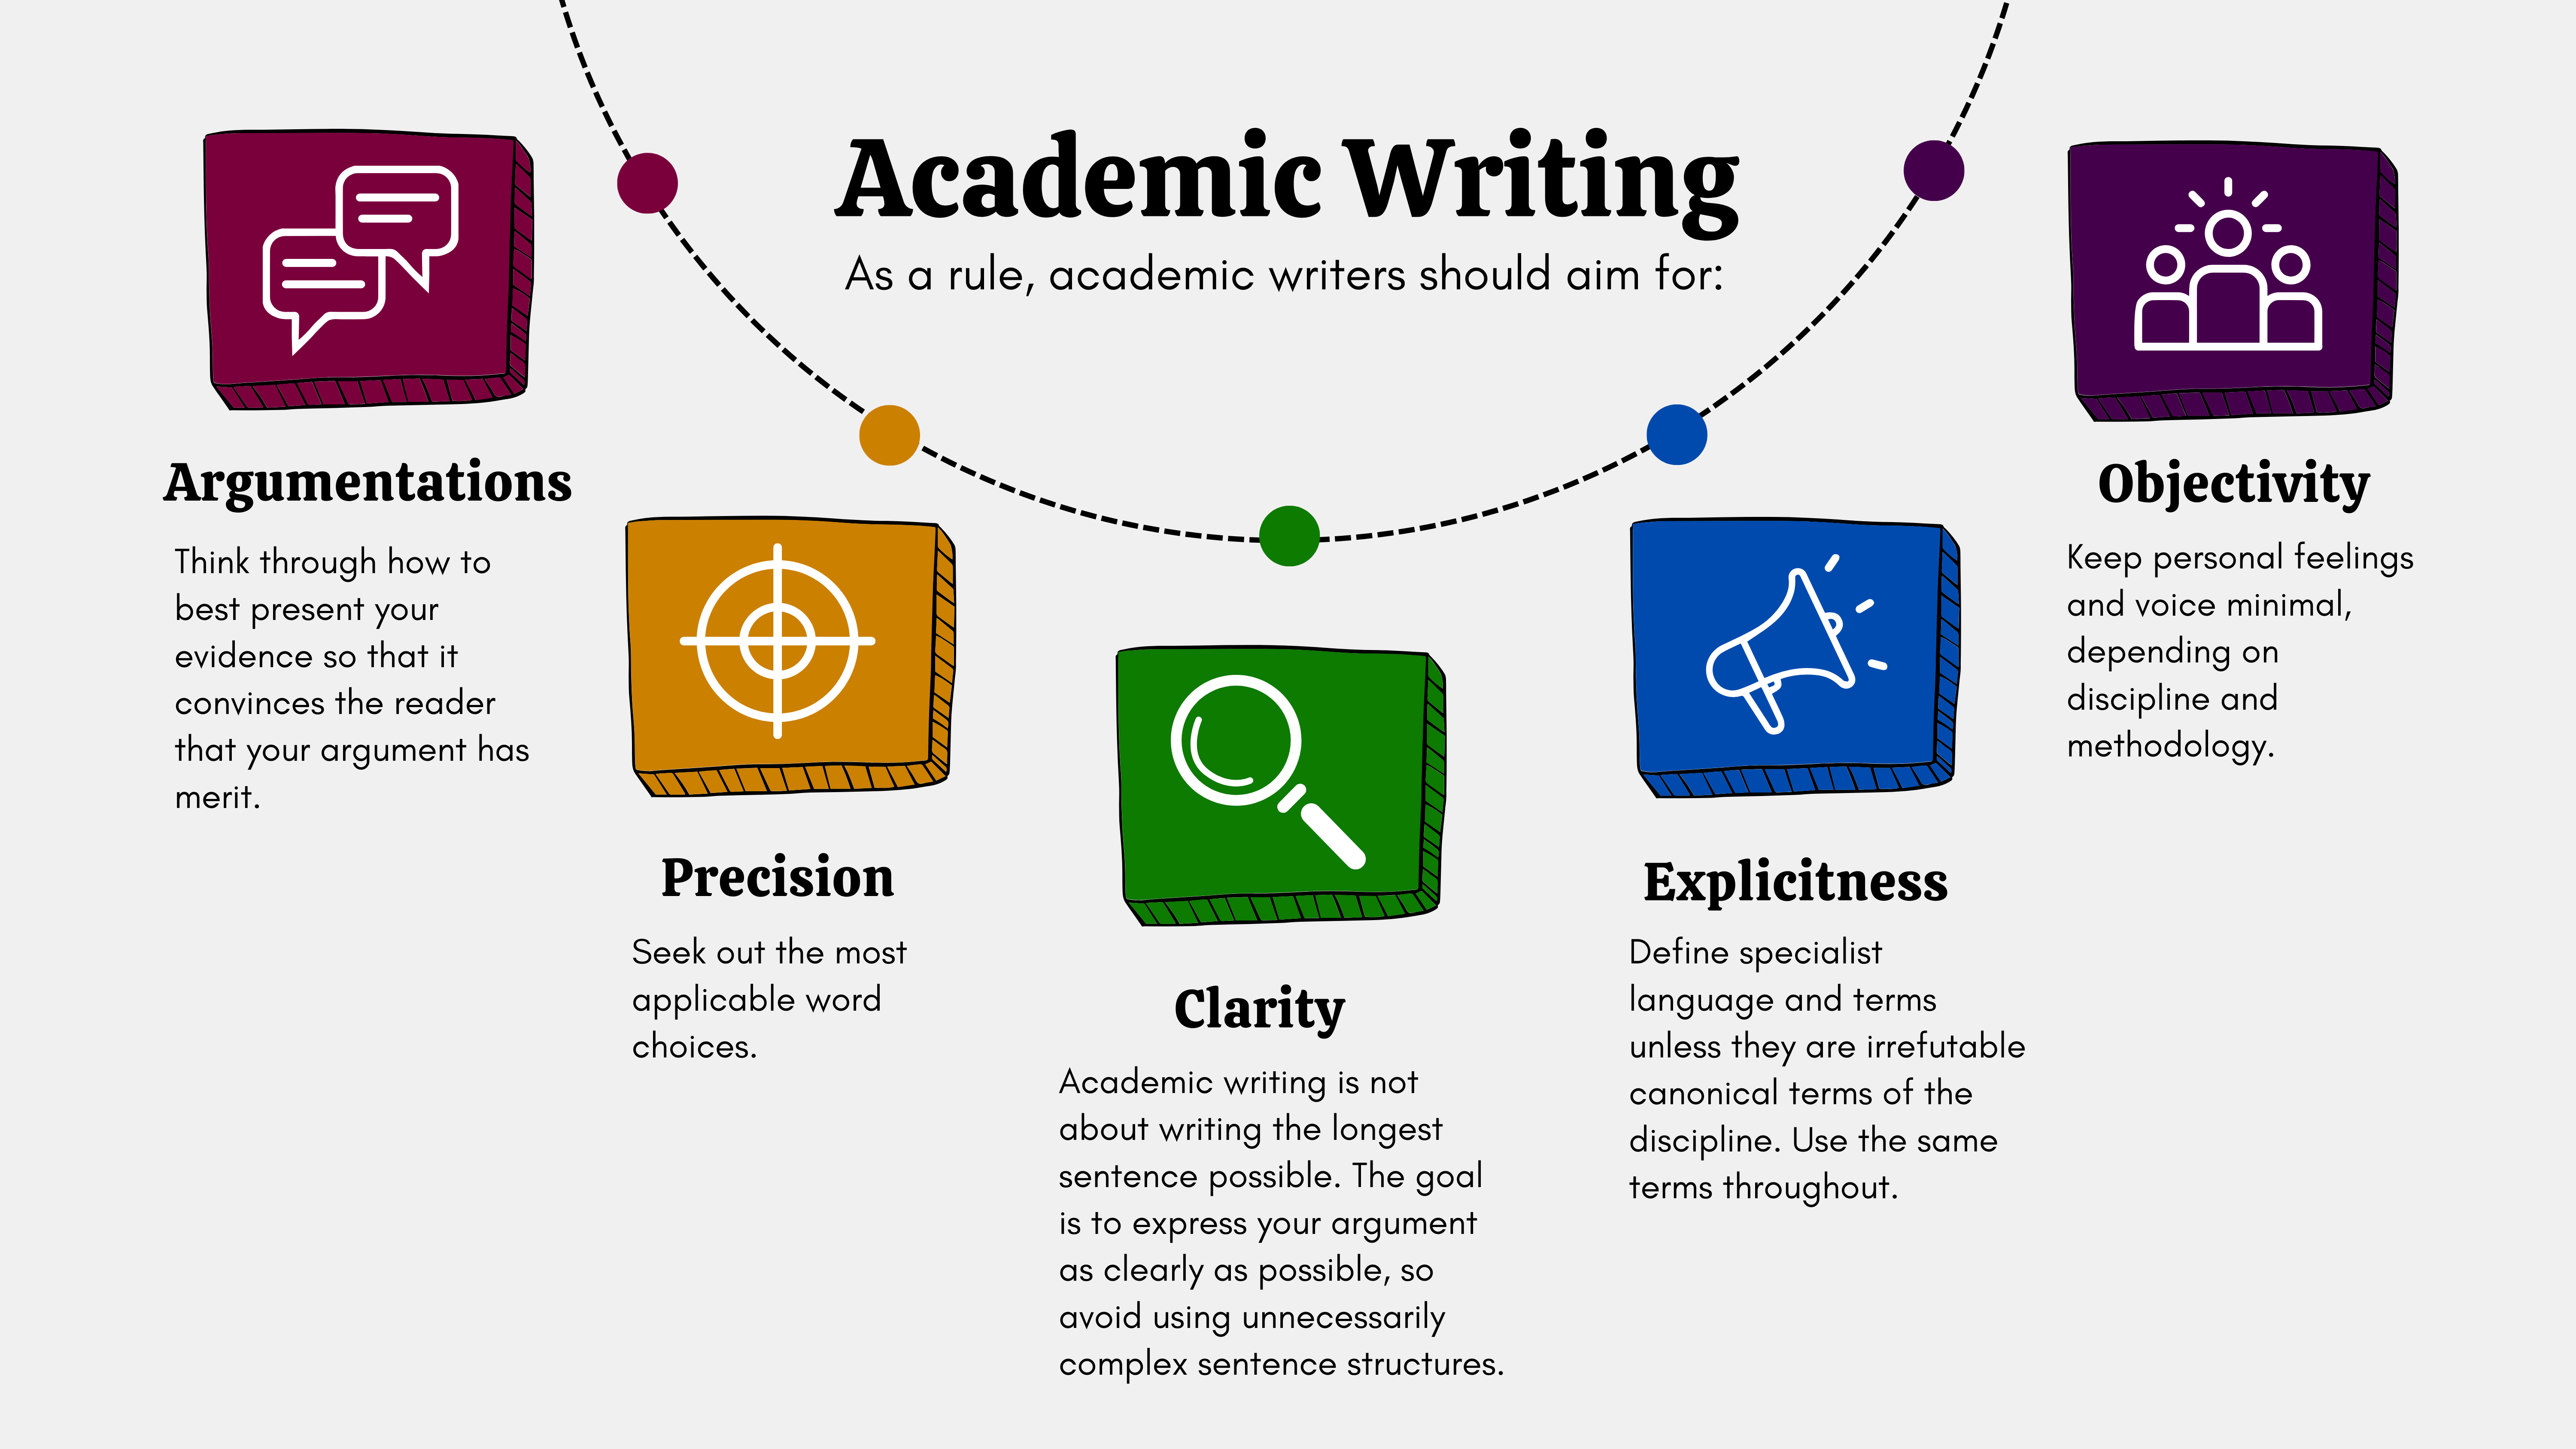 Infographic containing five suggestions for what academic writers should aim for in their writing with text description below.